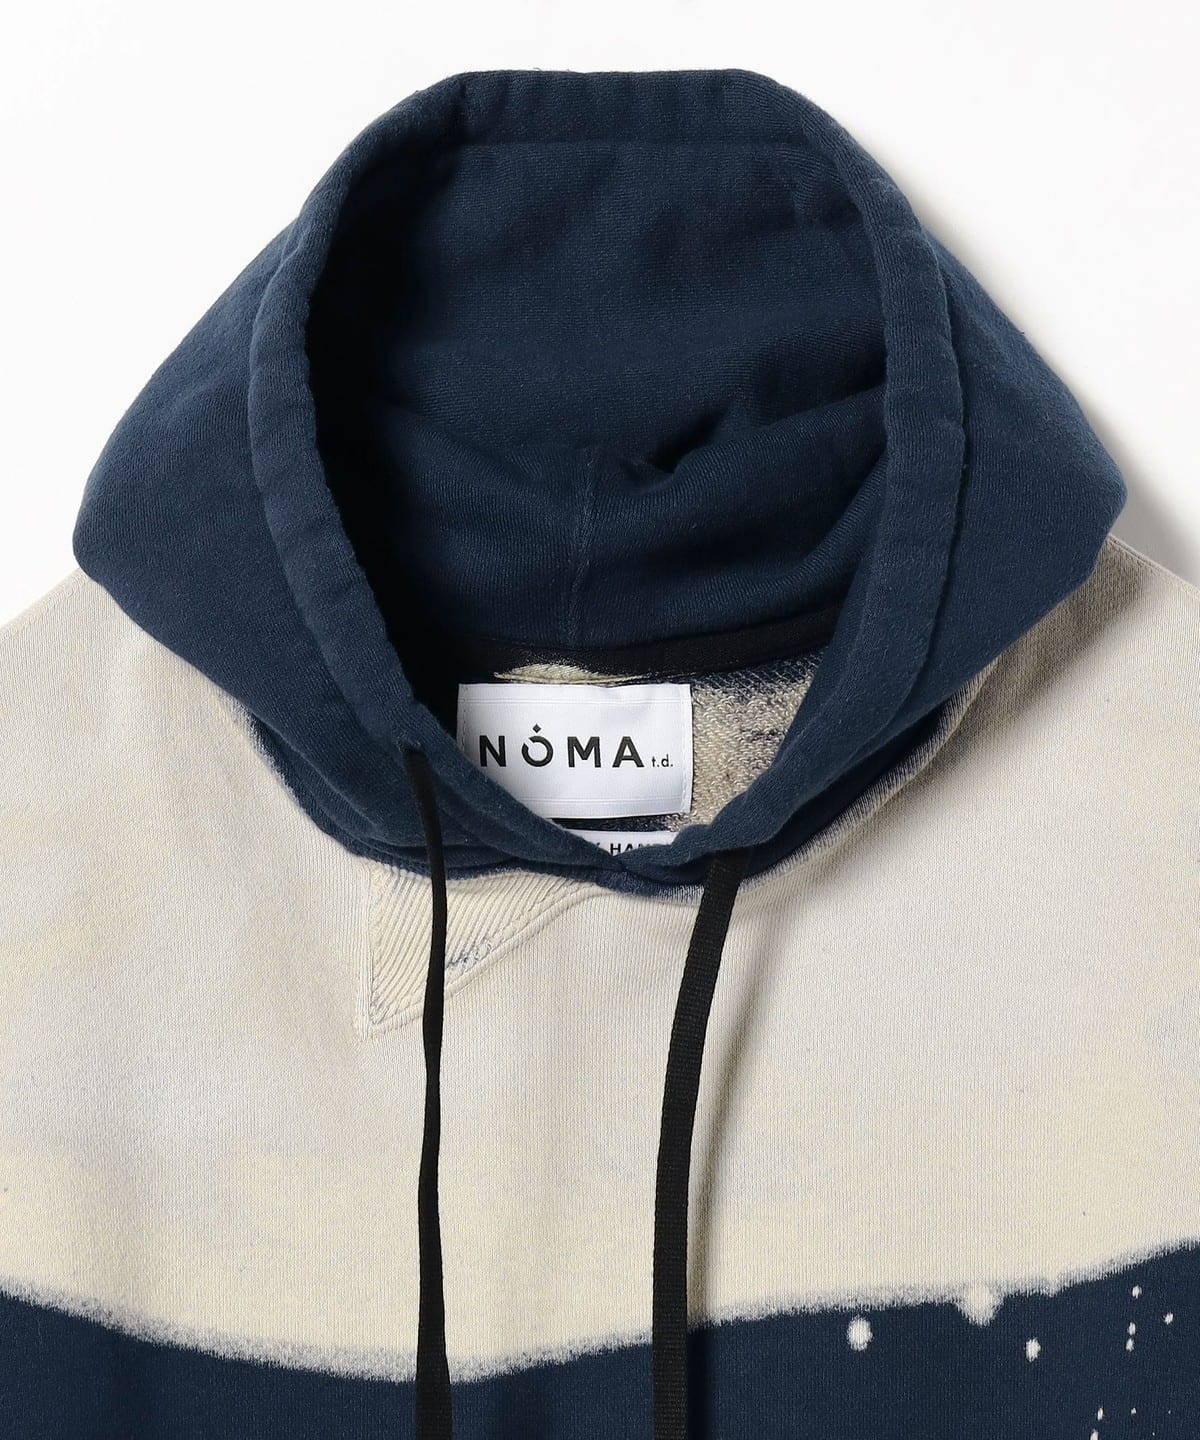 BEAMS（ビームス）【アウトレット】NOMA t.d. / HAND DYED TWIST